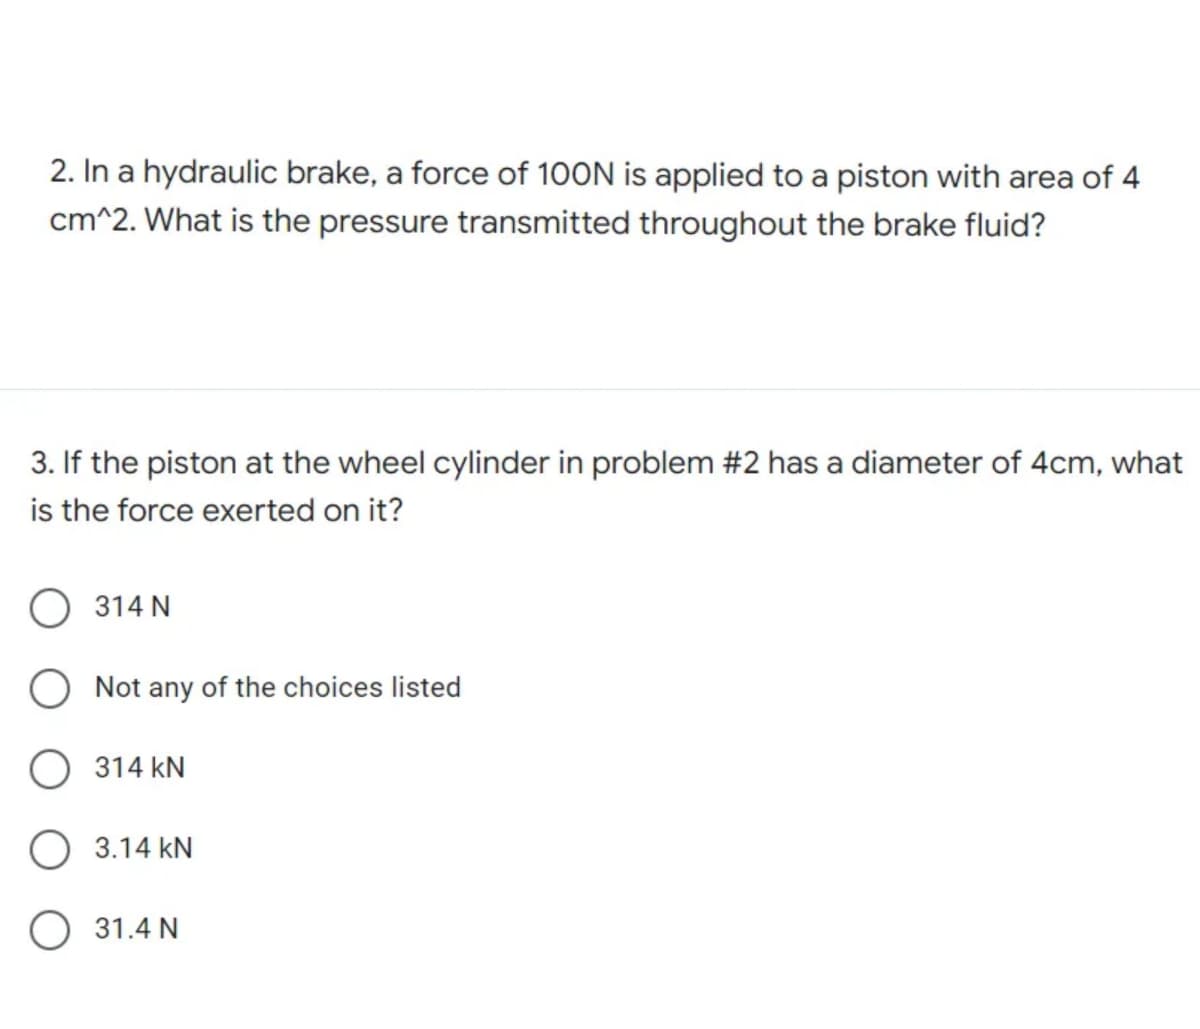 2. In a hydraulic brake, a force of 100N is applied to a piston with area of 4
cm^2. What is the pressure transmitted throughout the brake fluid?
3. If the piston at the wheel cylinder in problem #2 has a diameter of 4cm, what
is the force exerted on it?
314 N
Not any of the choices listed
314 KN
O 3.14 KN
31.4 N